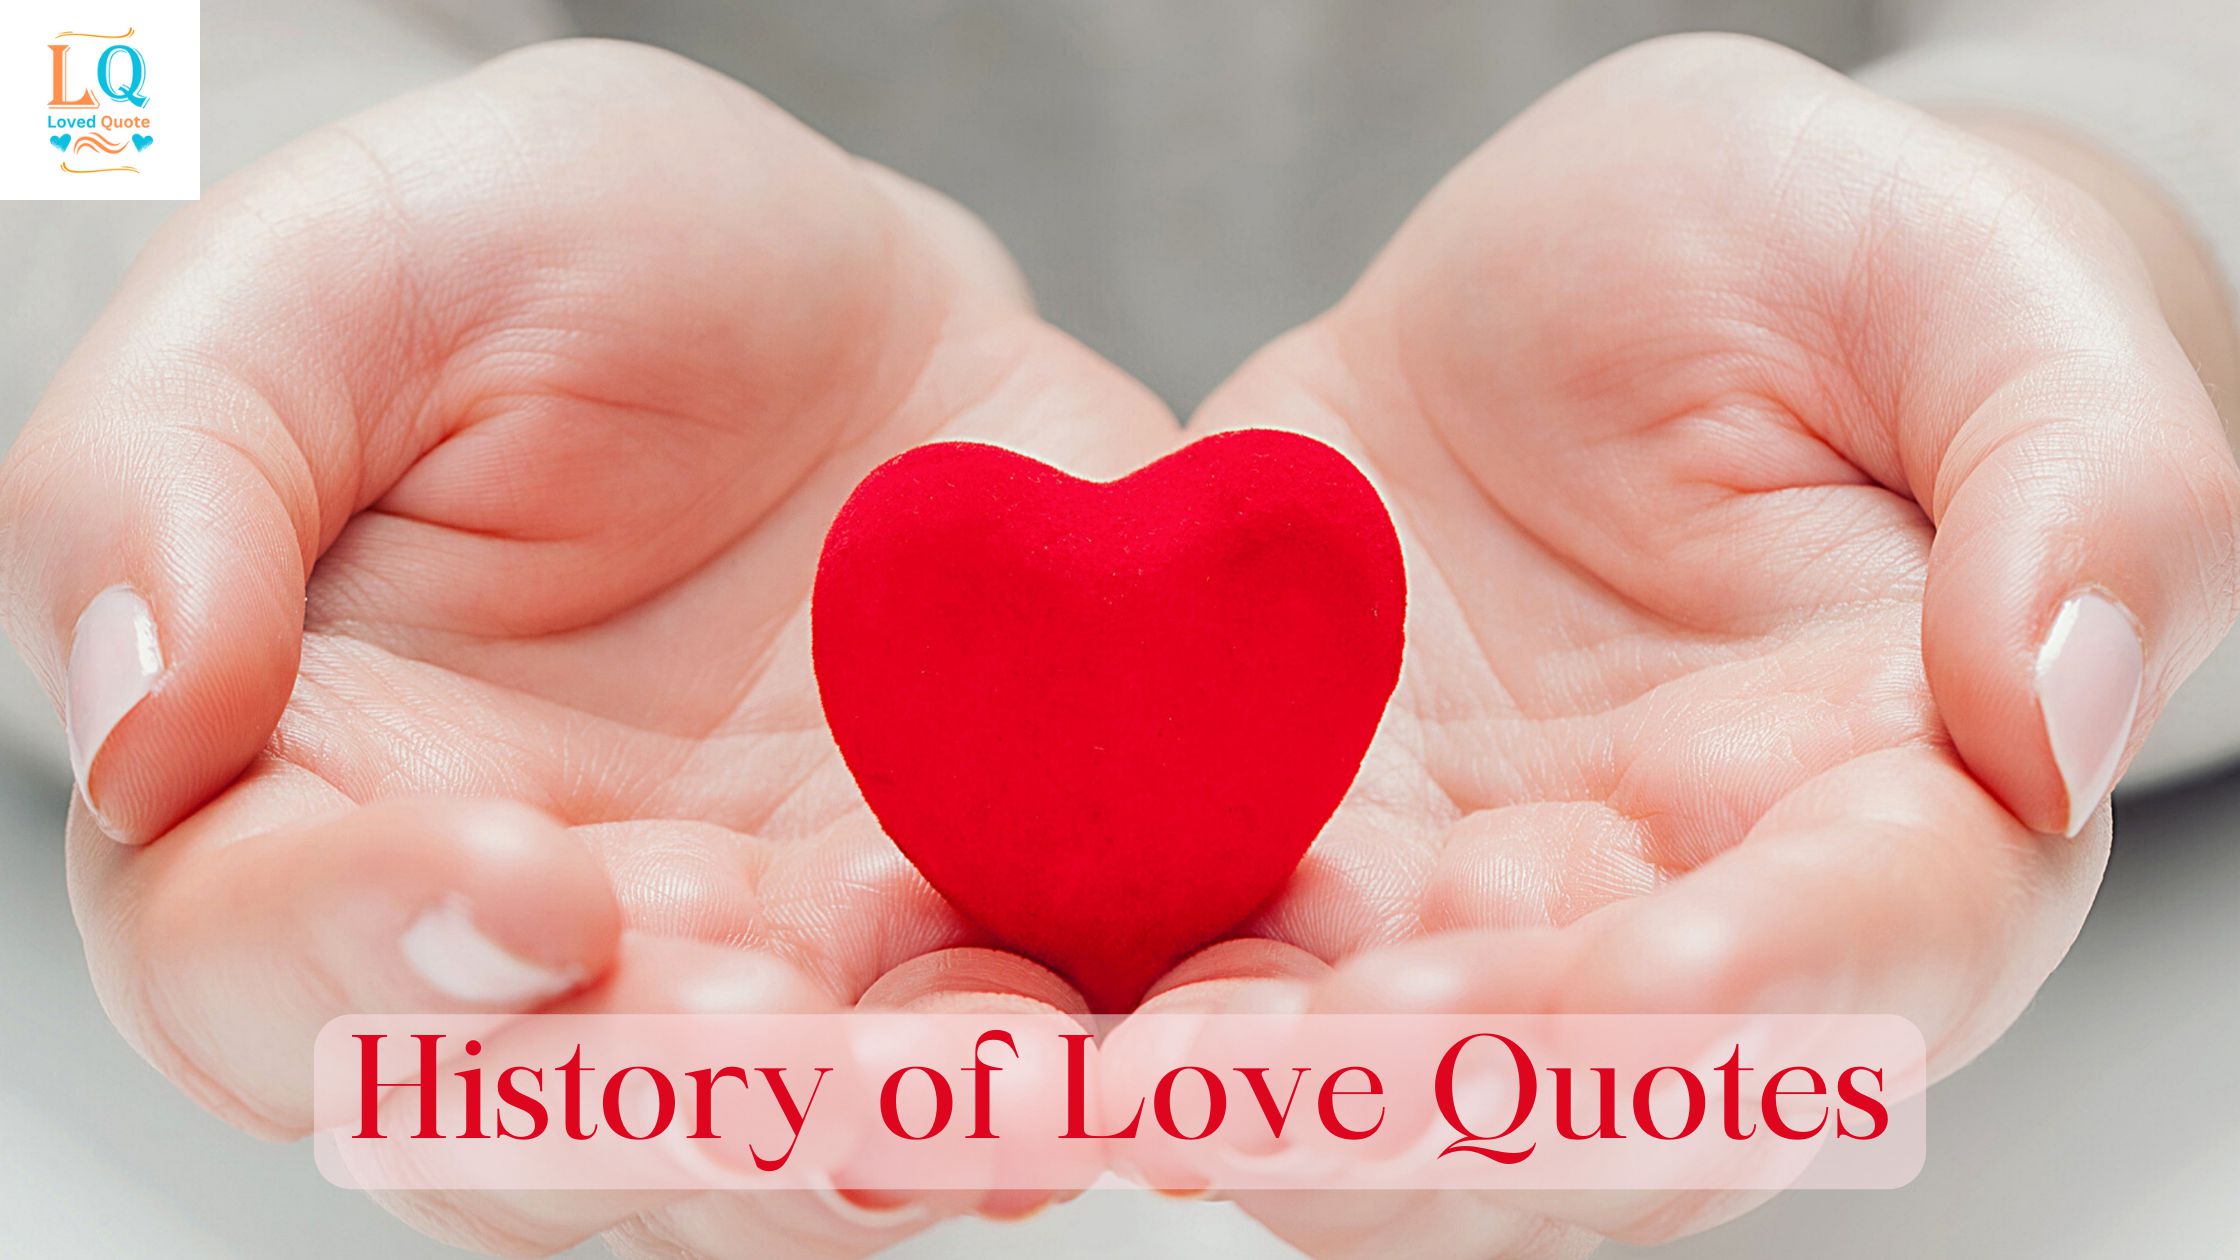 History of Love Quotes